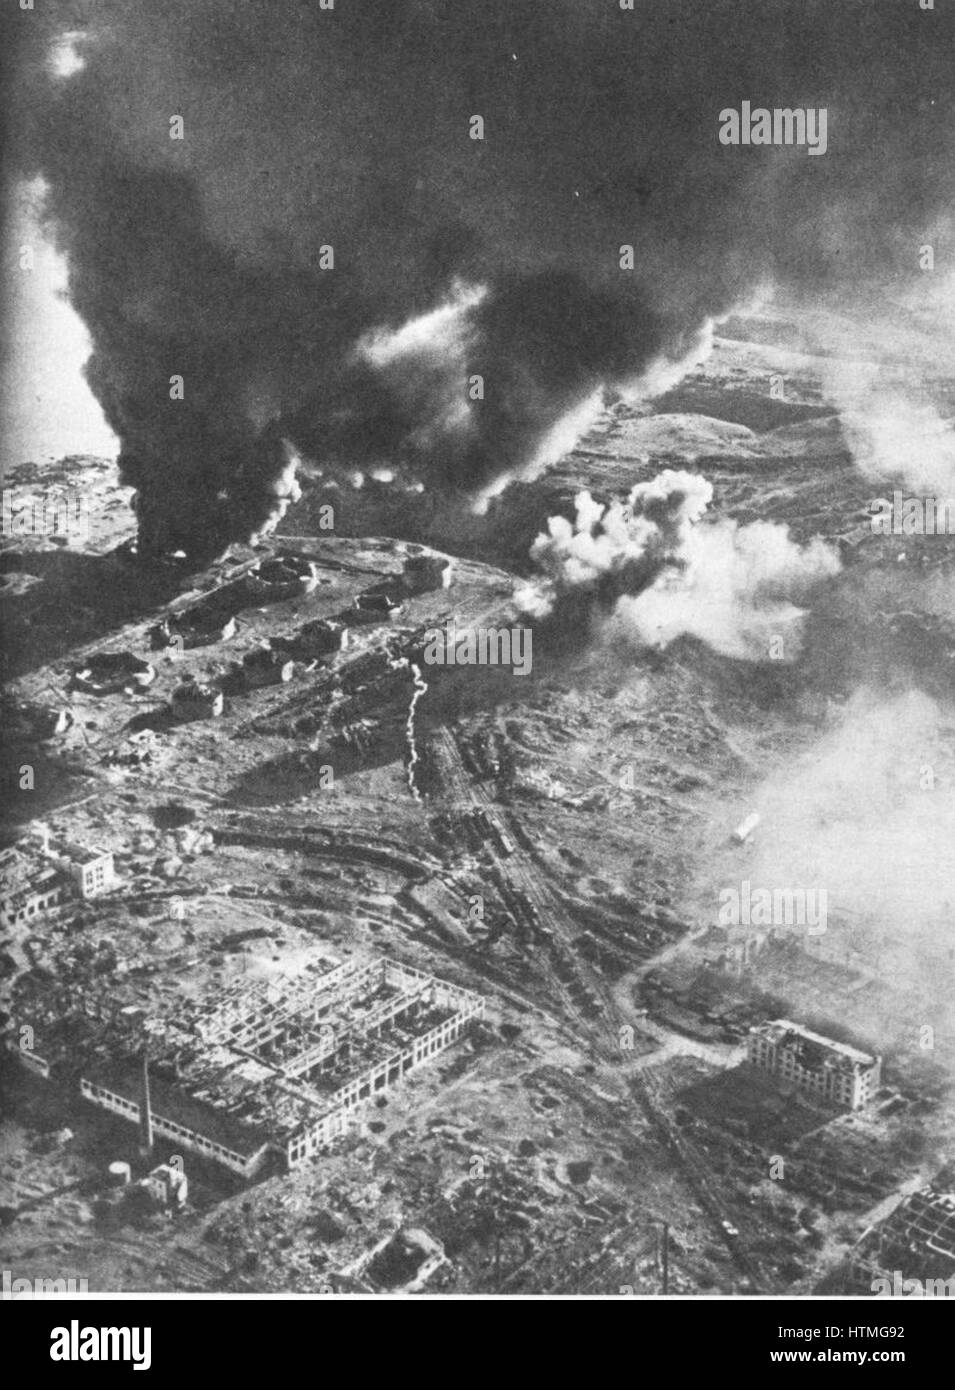 Battle of Stalingrad - Aerial view of fuel stores on fire. The Battle of Stalingrad between Germany and the Soviet Union lasted from 17 July 1942 until 2 February 1943. The mosty brutal and bloodiest of engagements of World War II,it claimed almost 2 mill Stock Photo